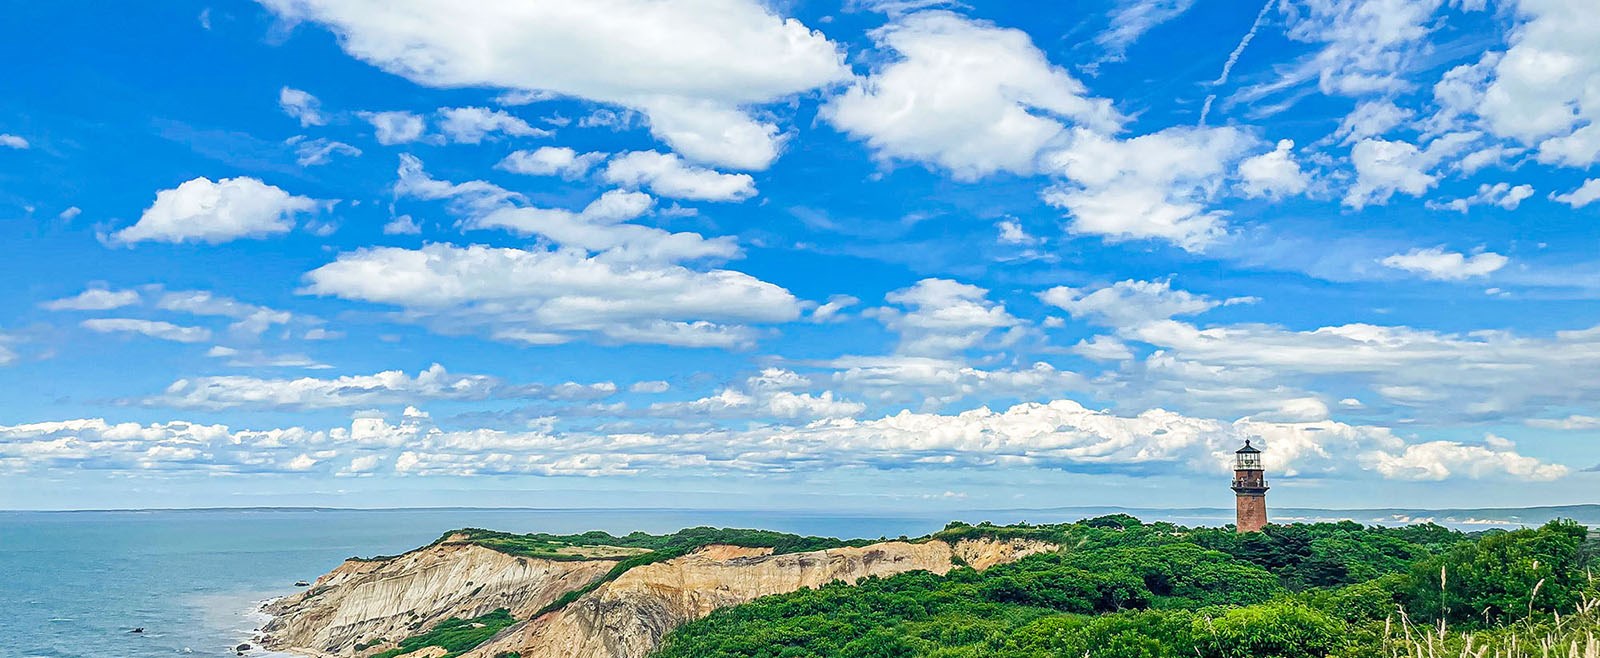 Looking to get an amazing picture on Martha's Vineyard? Check out these ten photo worthy locations.